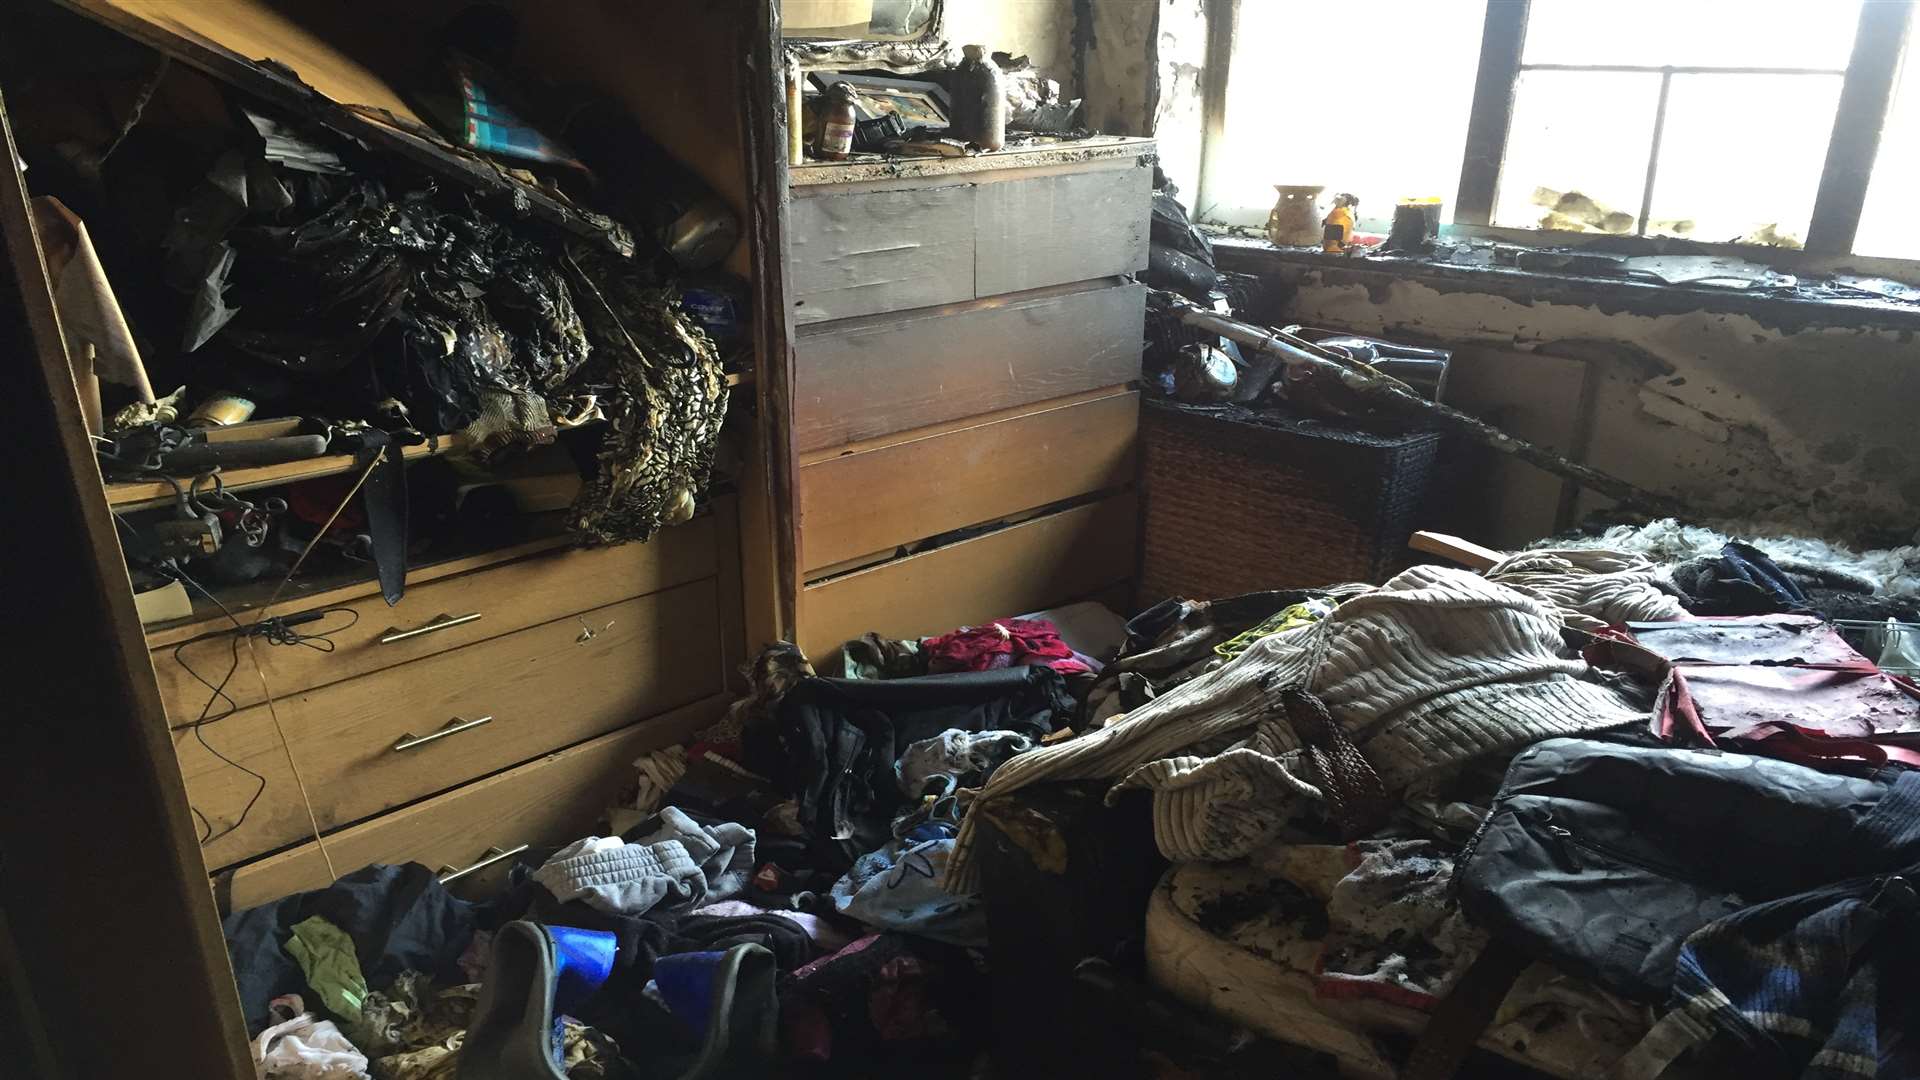 A fire ripped through the bedroom of the house